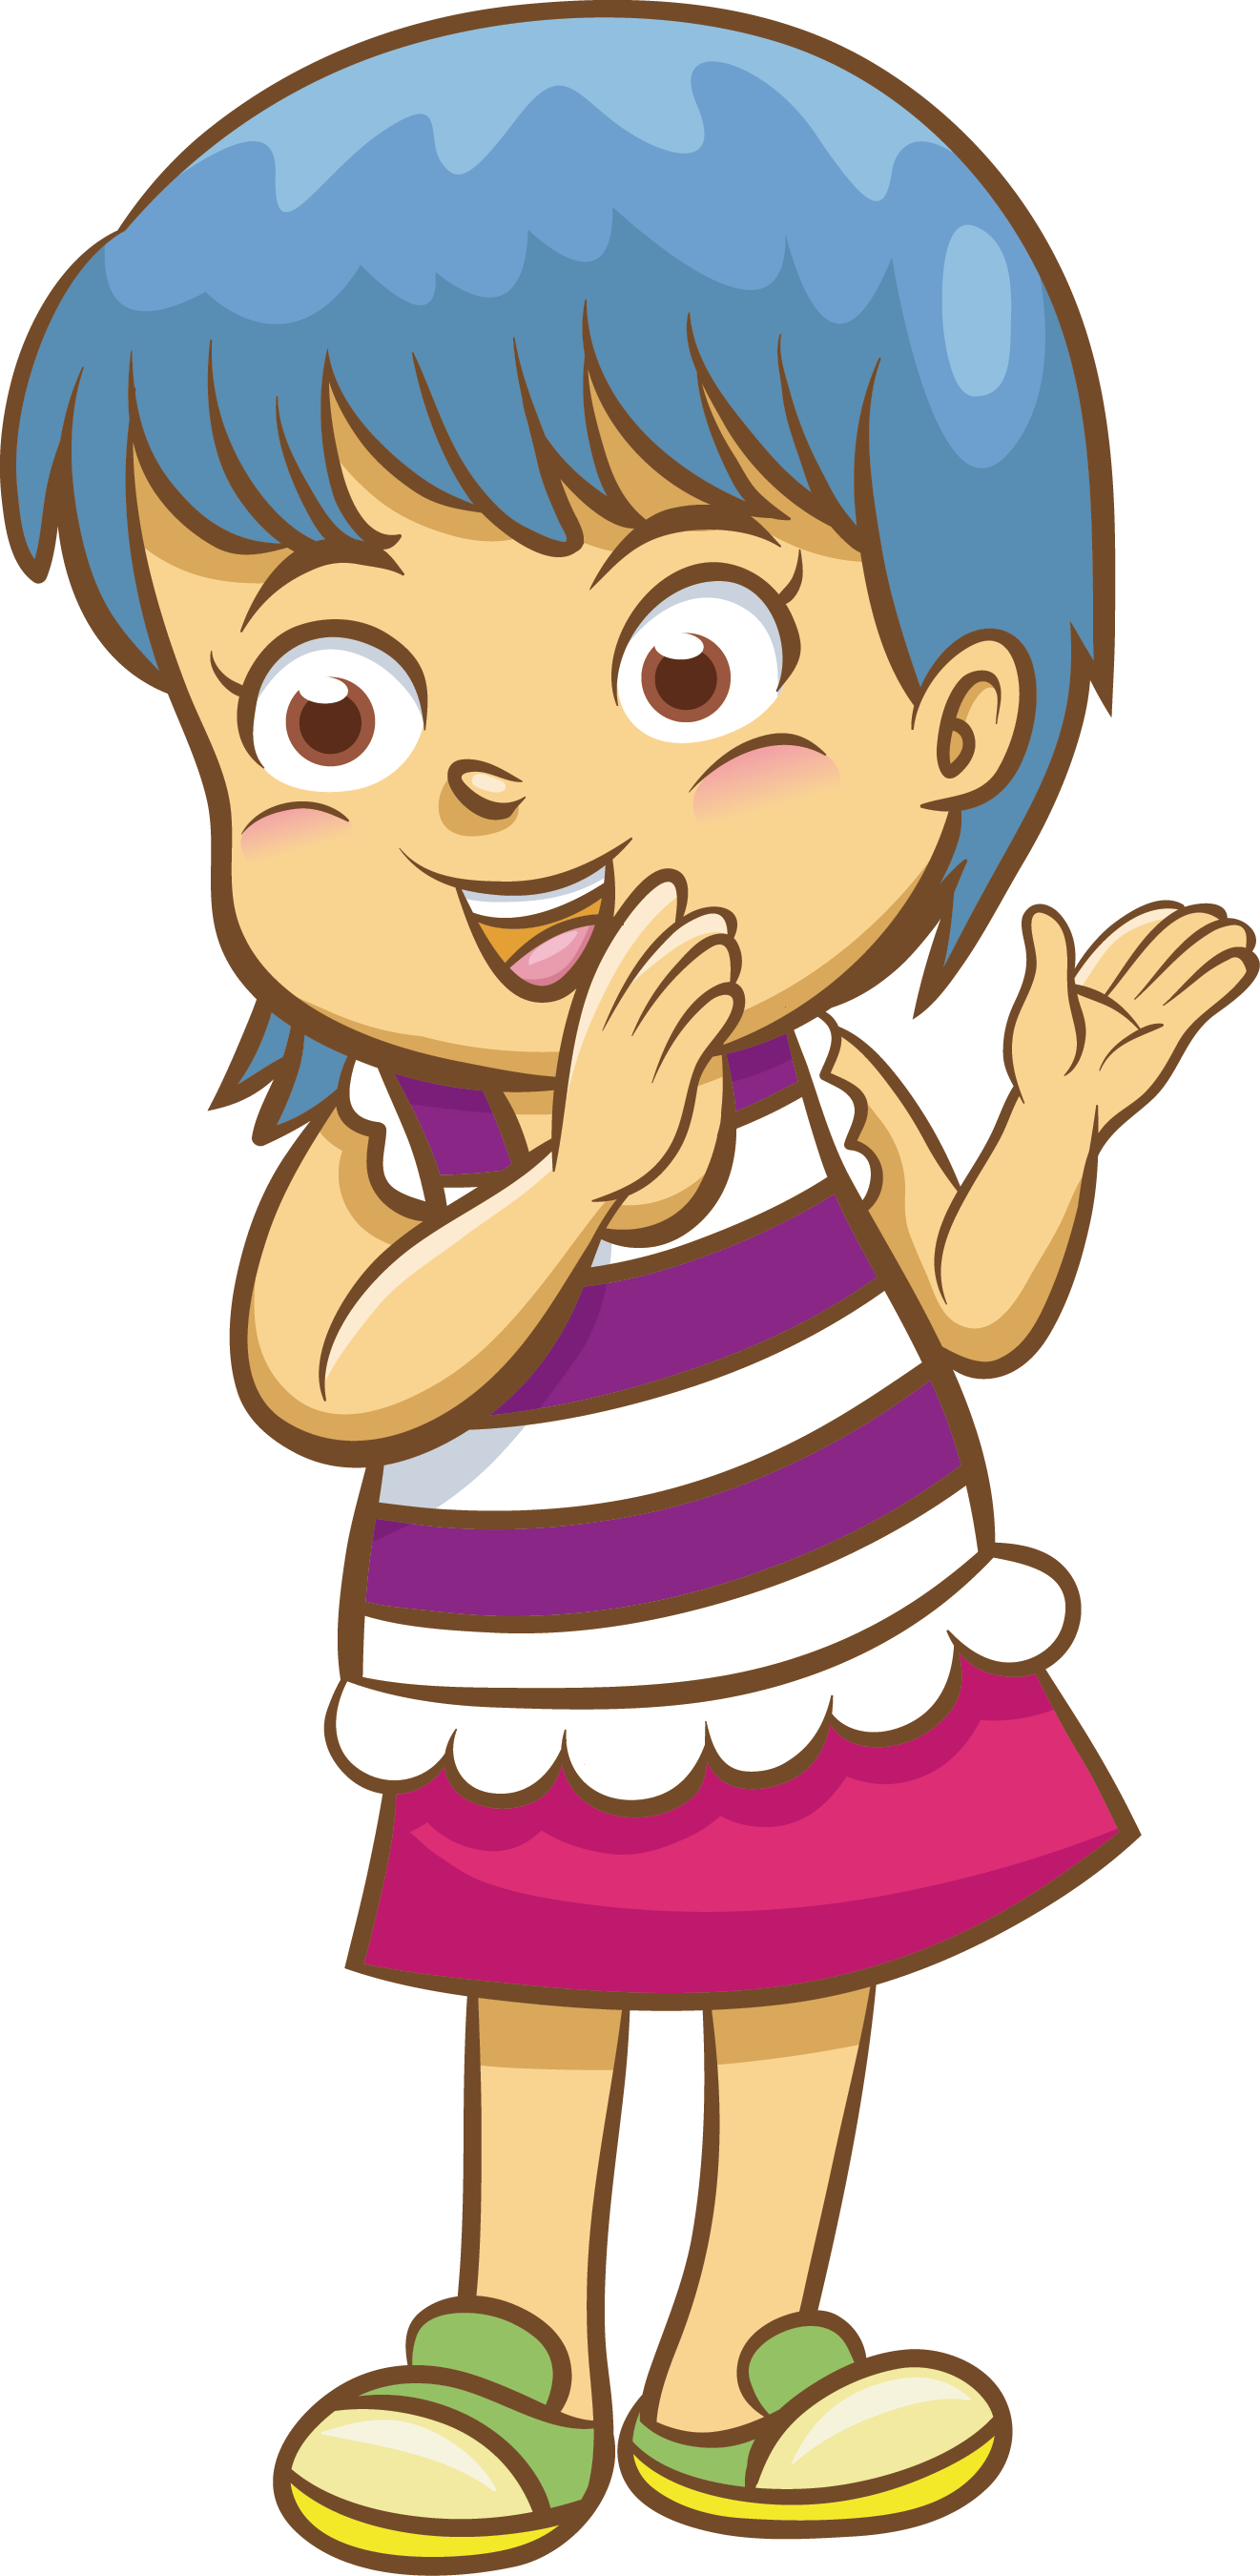 Animated Child Clapping PNG image